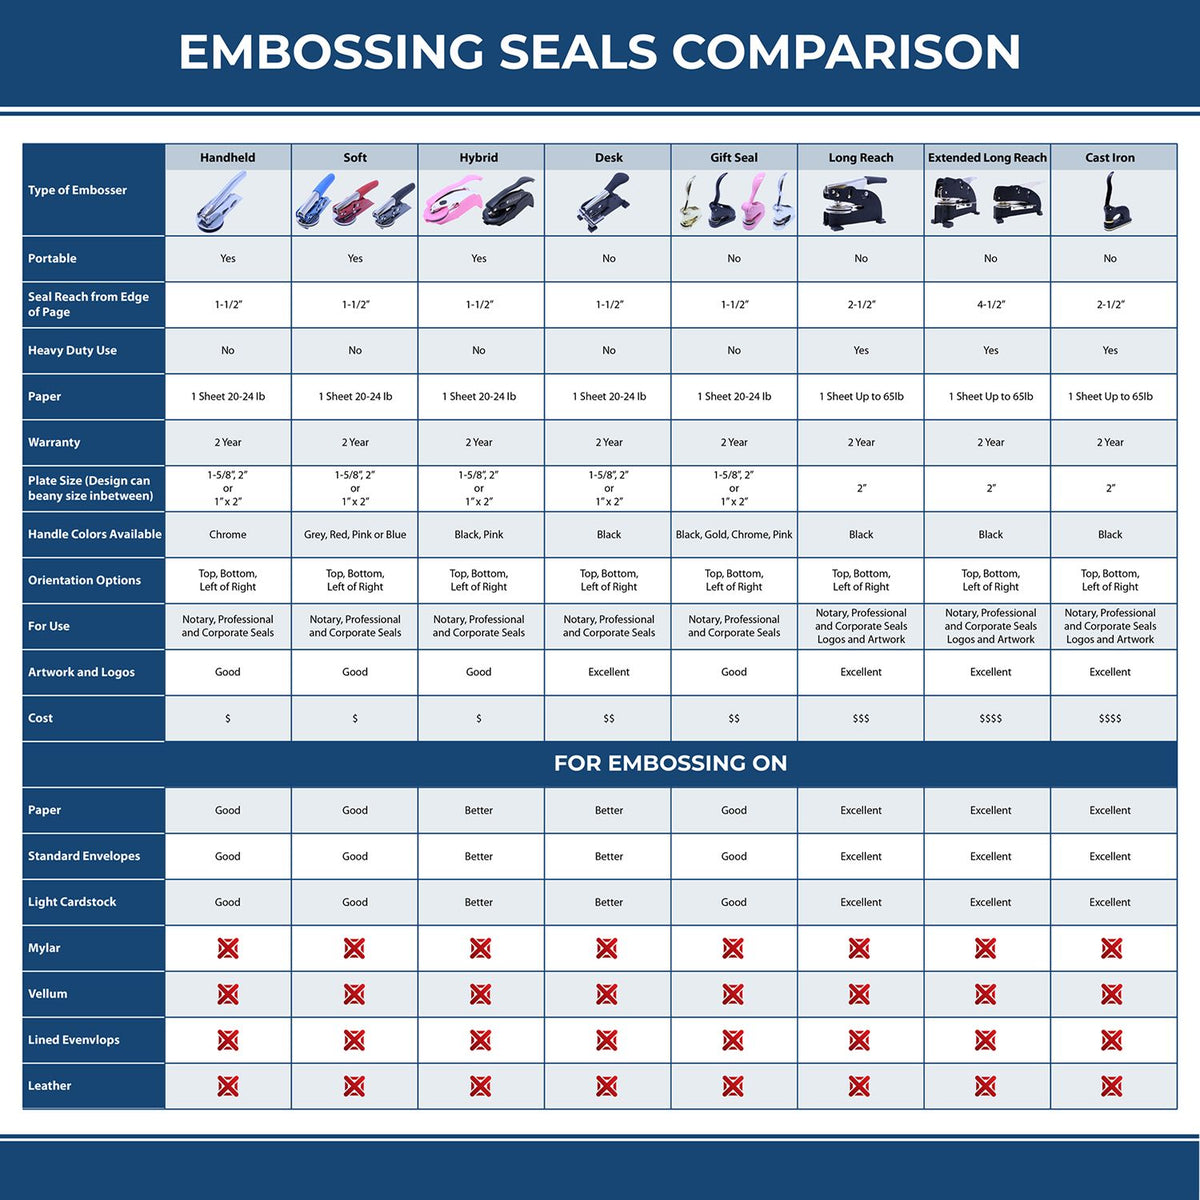 A comparison chart for the different types of mount models available for the Hybrid Maryland Engineer Seal